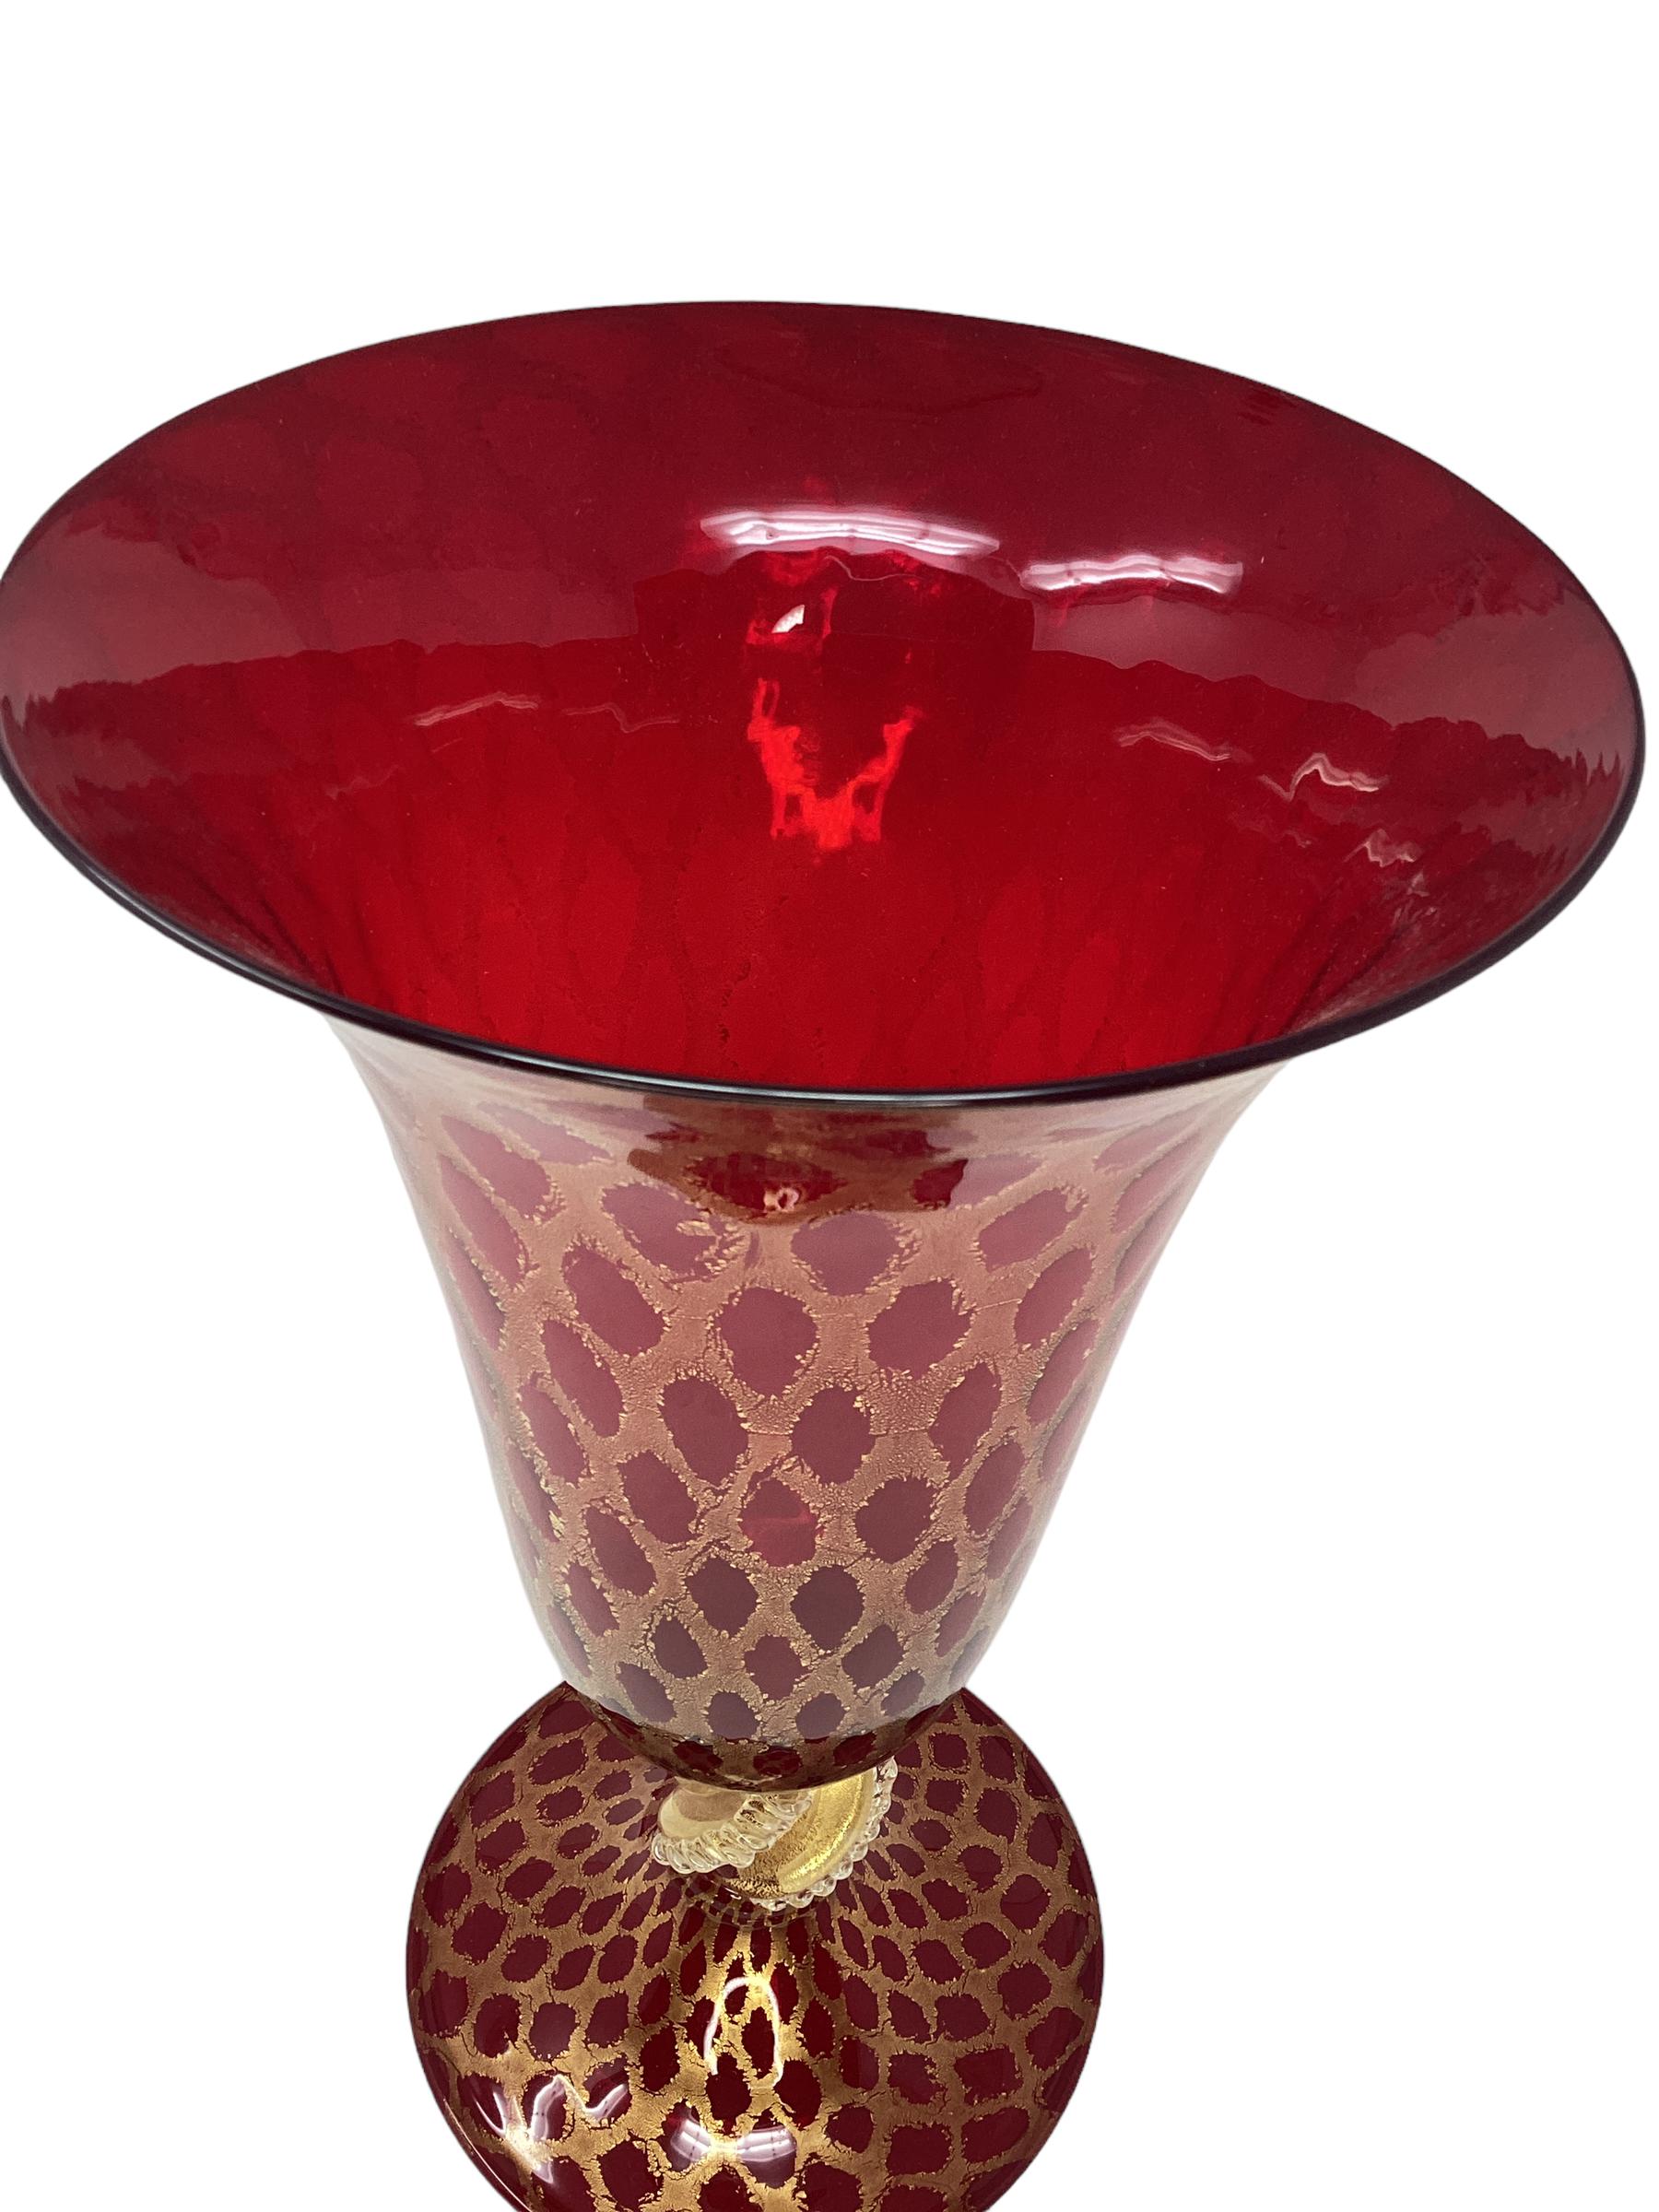 Gorgeous Vintage Trumpet Shaped Red Murano Glass Vase. Hand thrown vase profusely decorated with gold inclusions. In excellent vintage condition. 